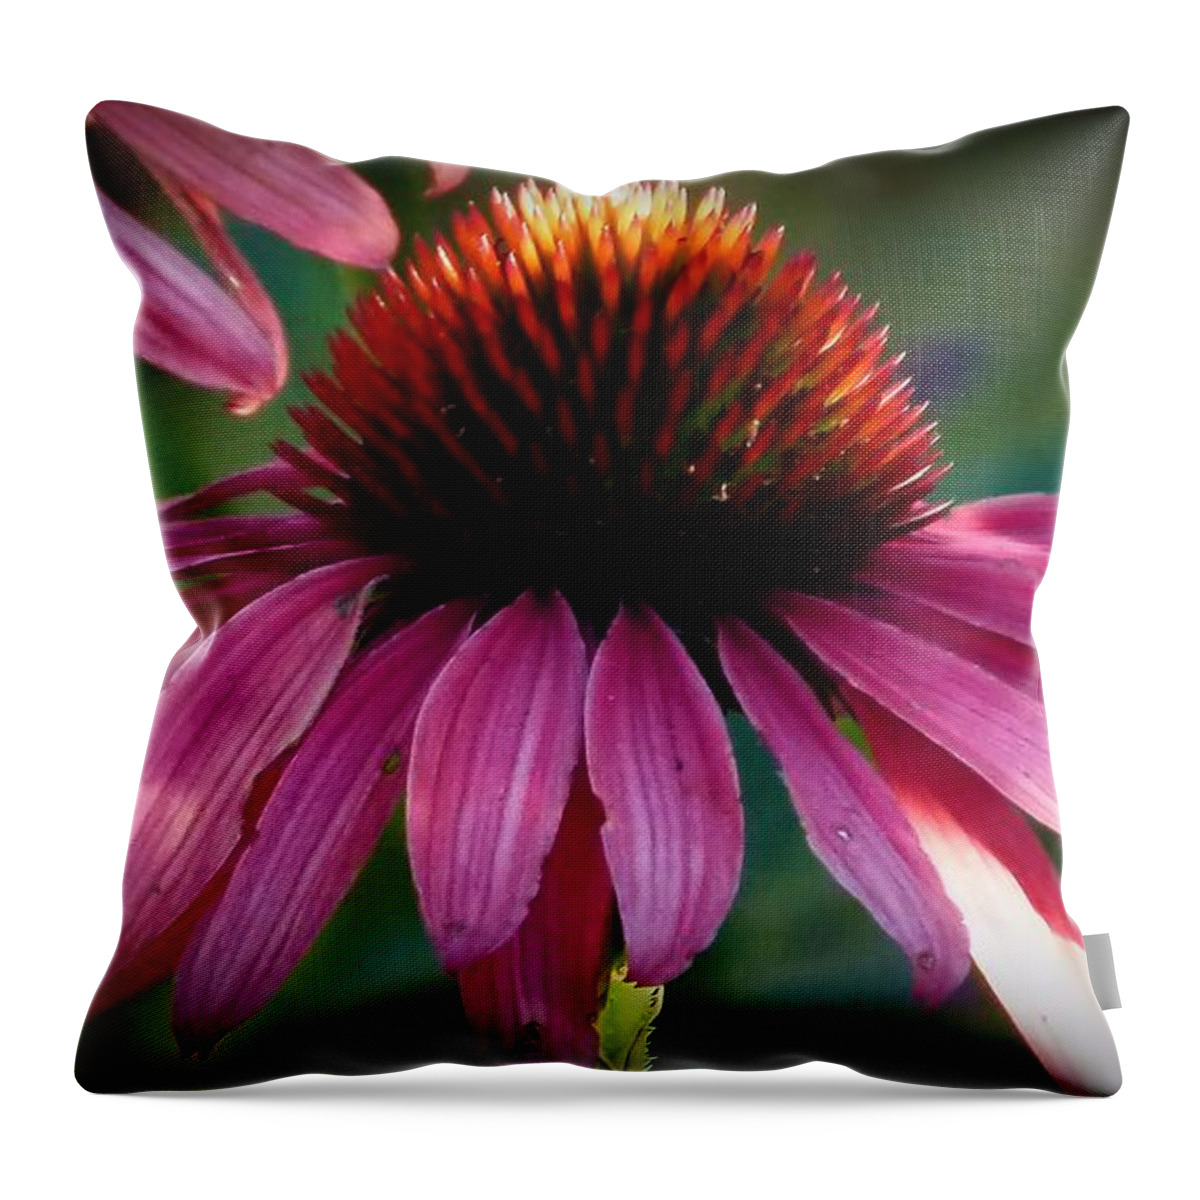 Nature Throw Pillow featuring the photograph Weathered Wilted And Worn by Julia Hassett